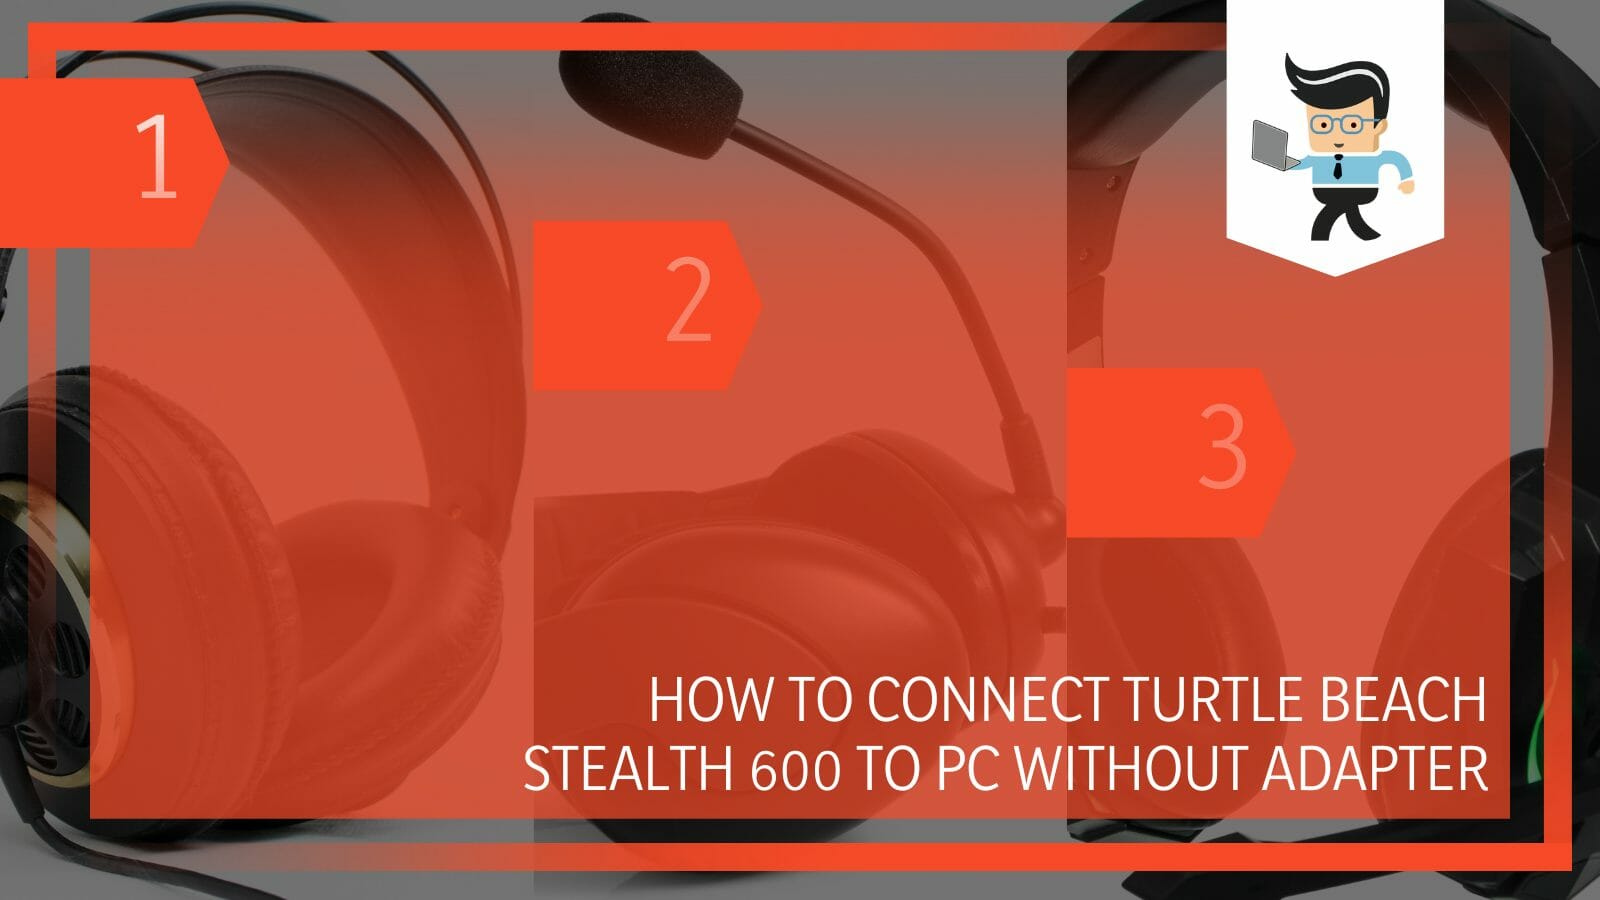 Connect Turtle Beach Stealth 600 to PC Without Adapter